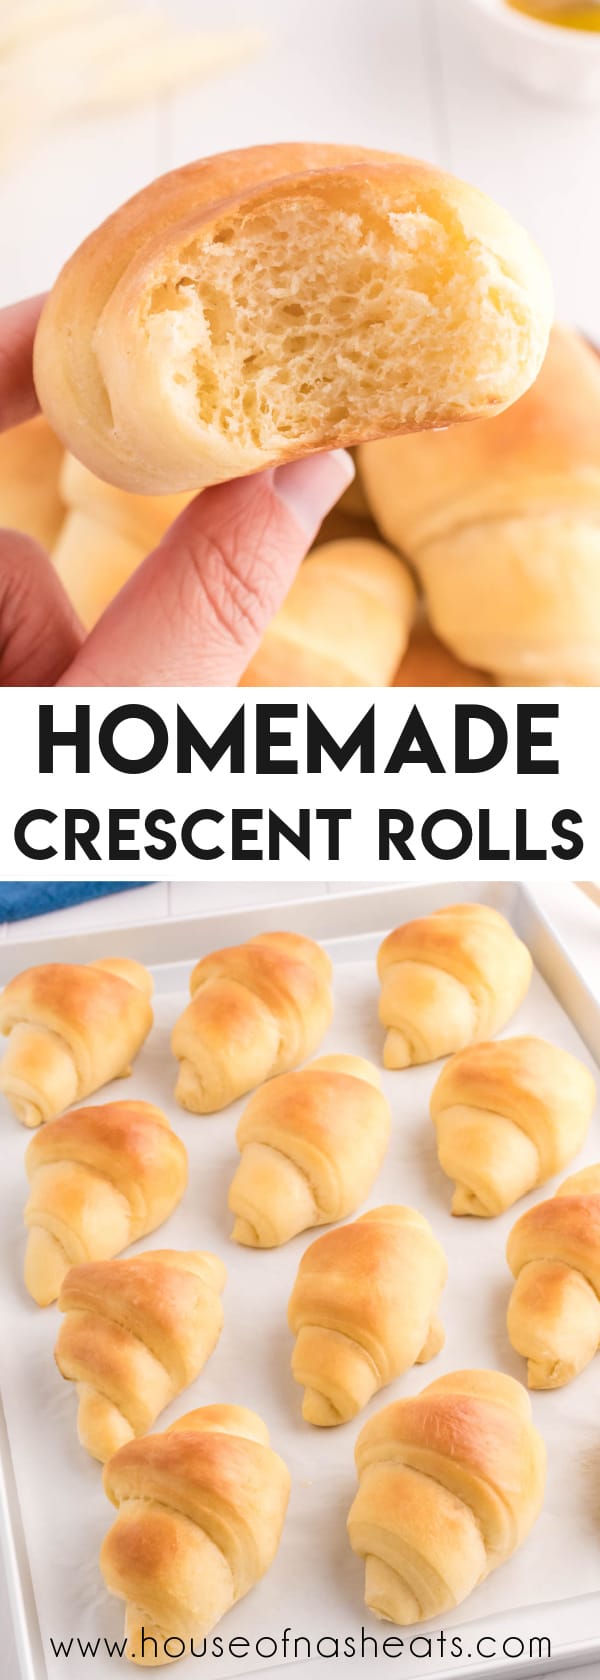 A collage of images of homemade crescent rolls with text overlay.